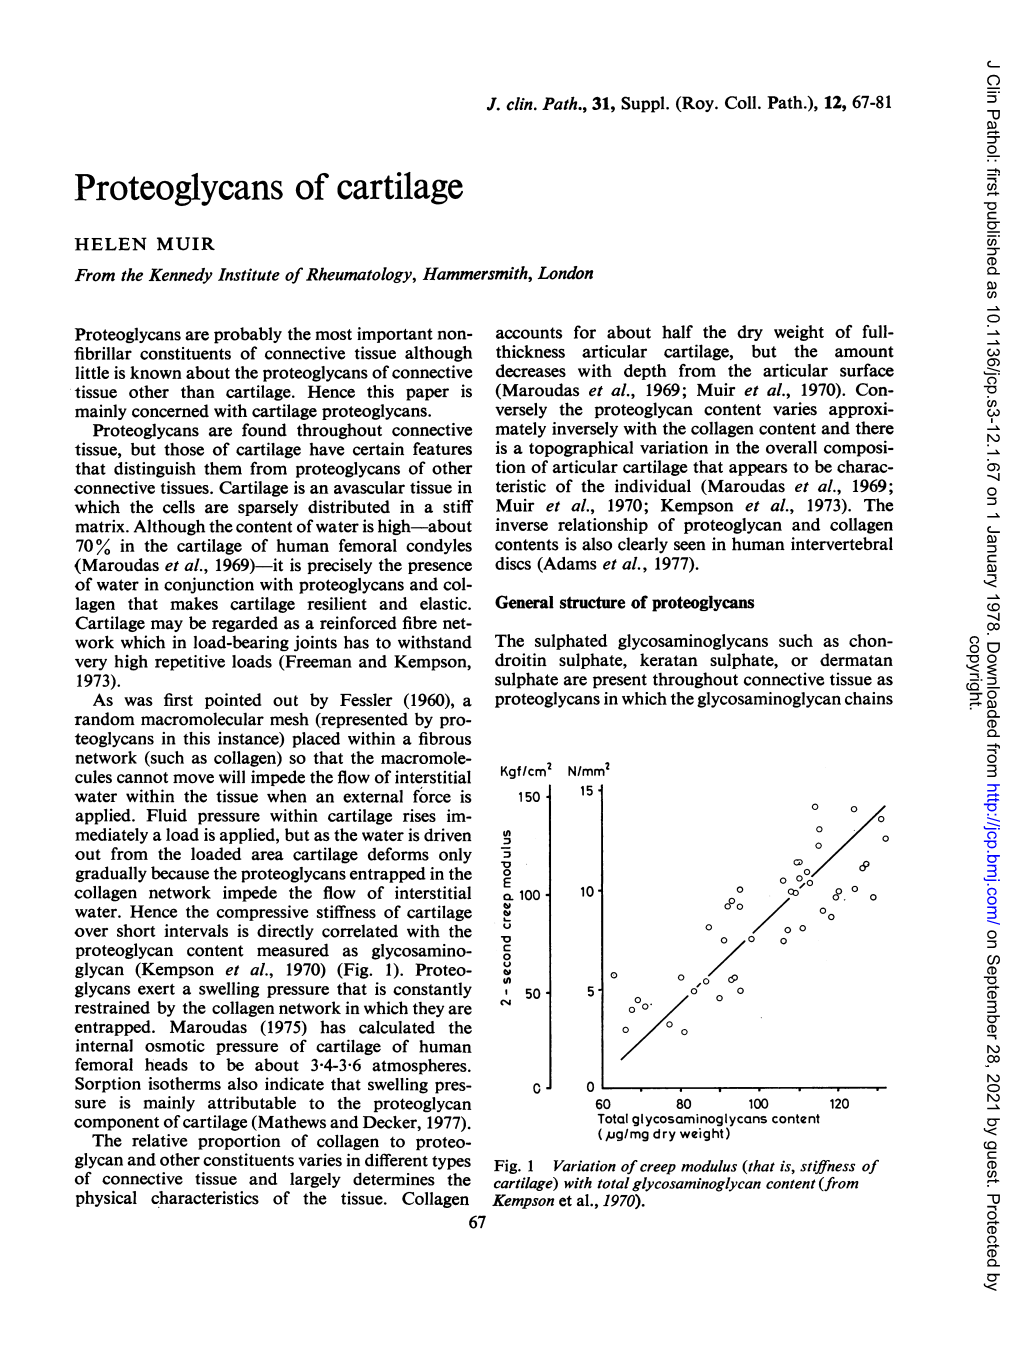 Proteoglycans of Cartilage